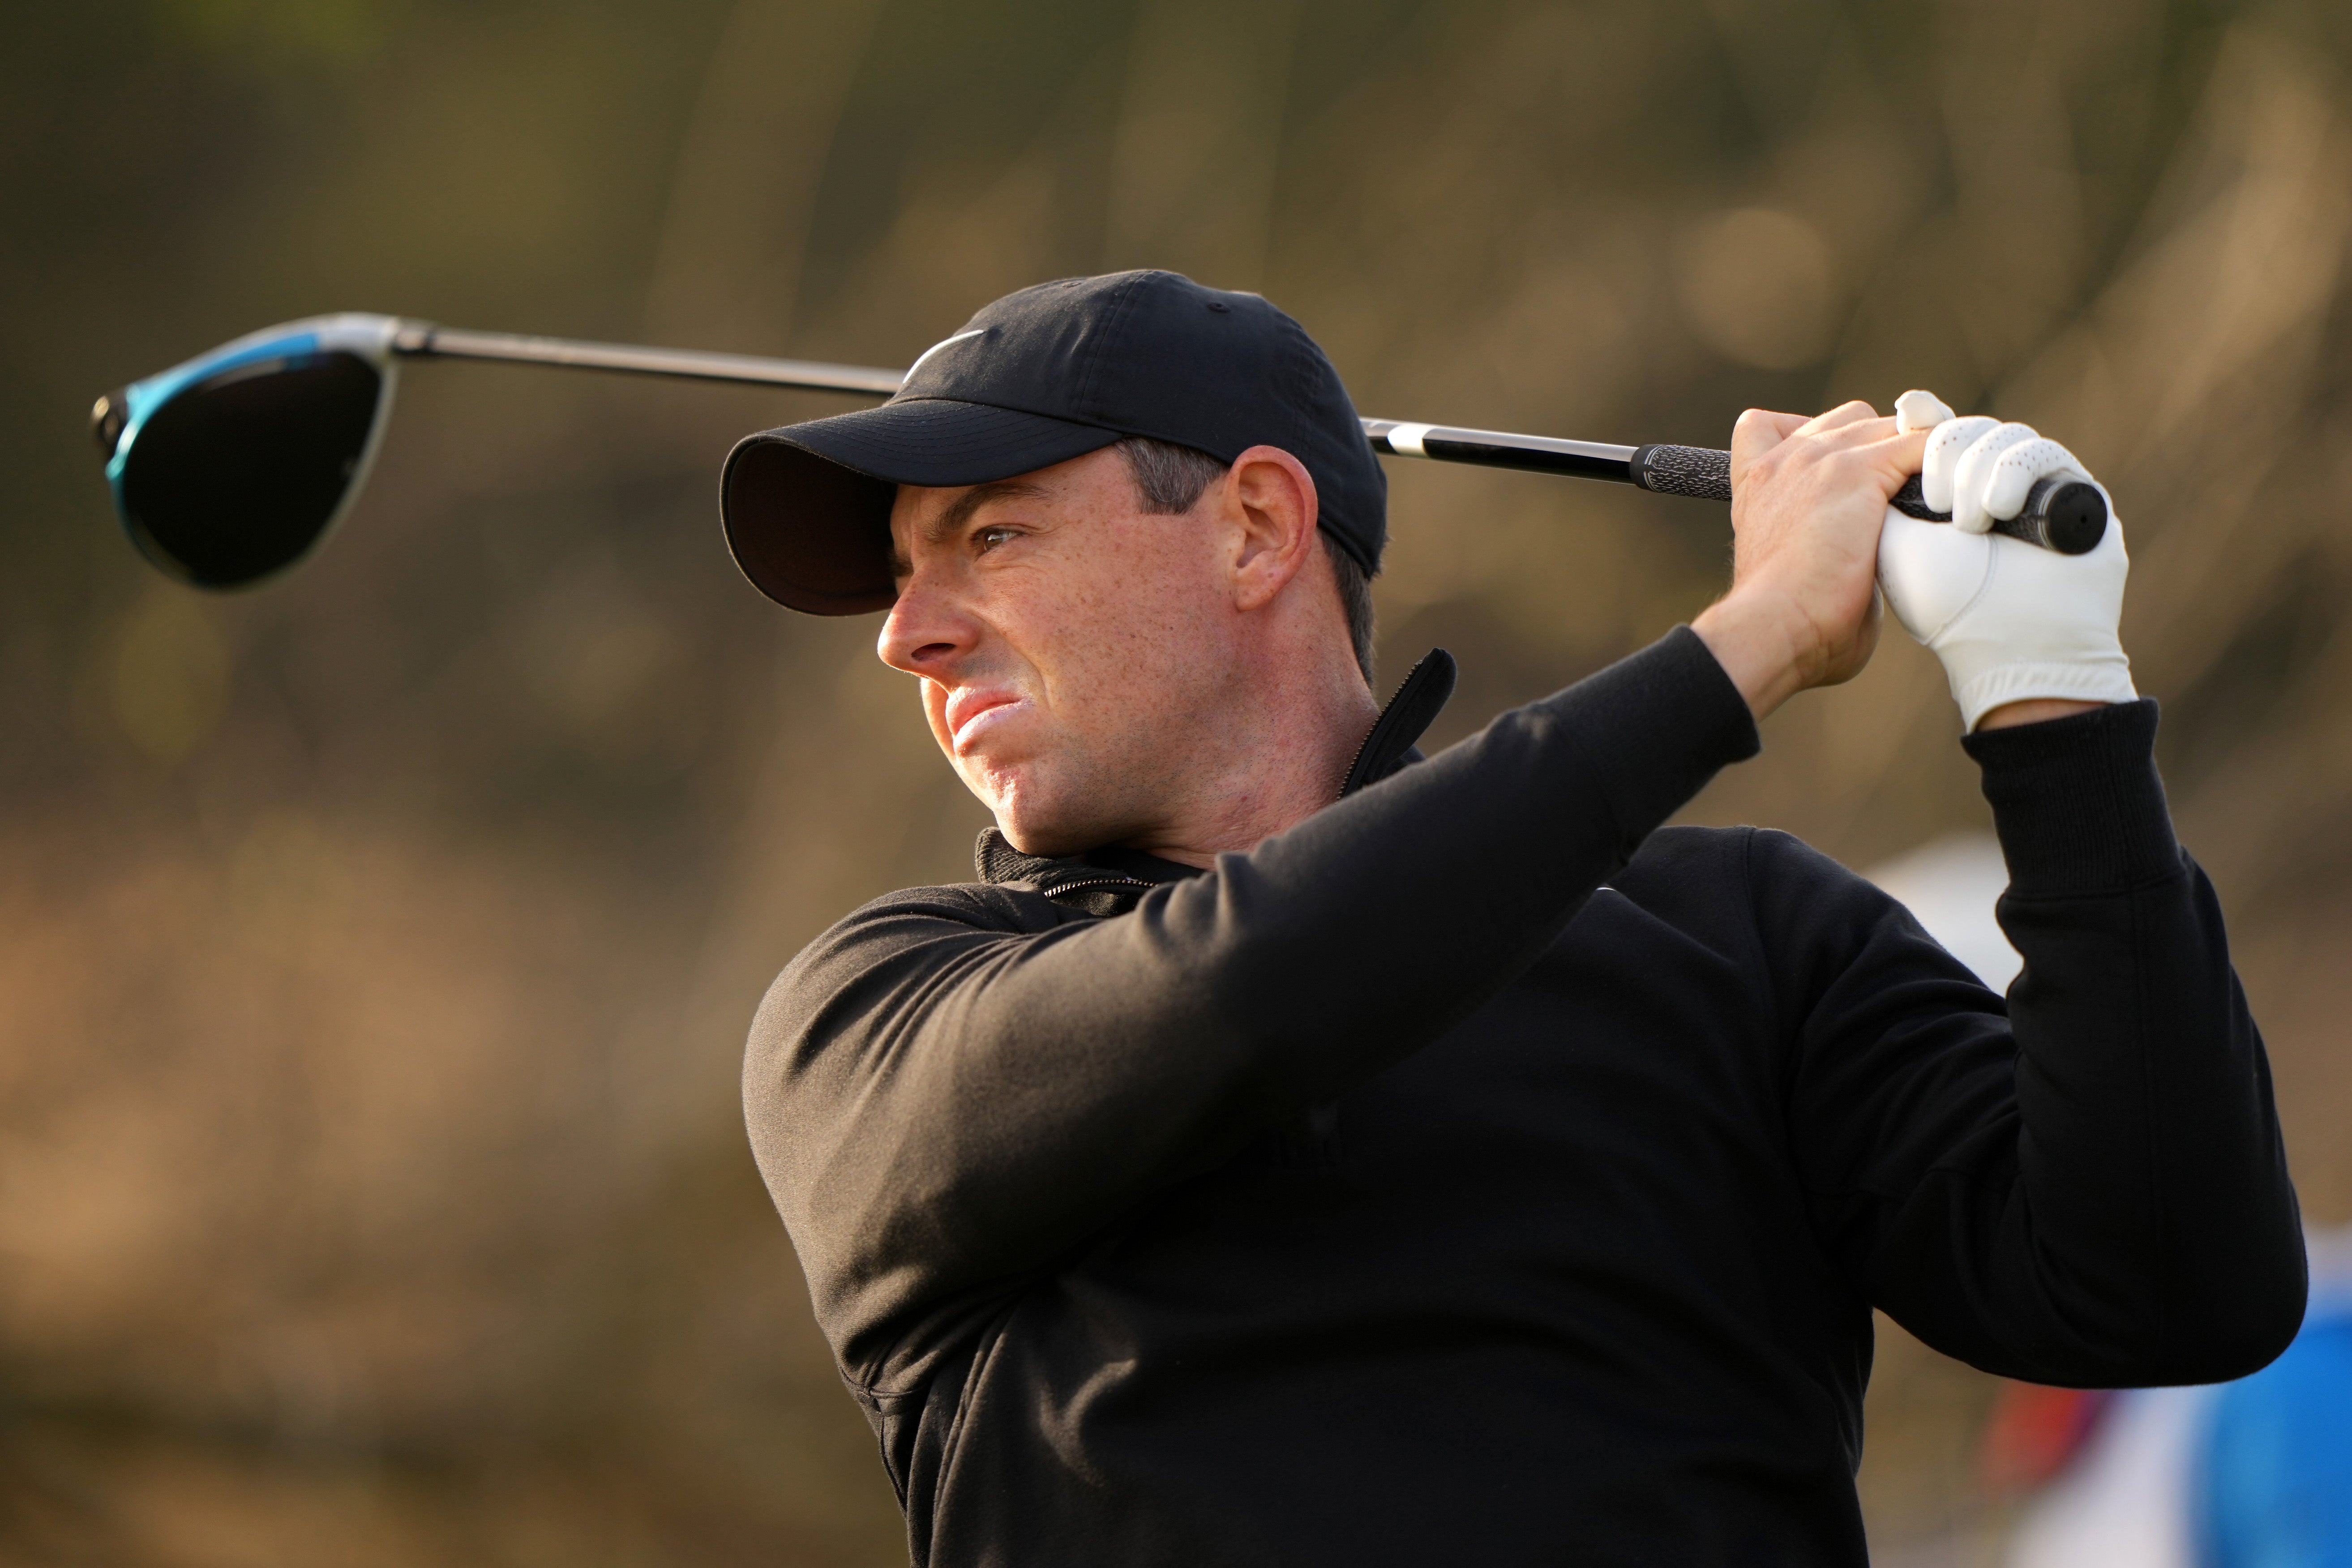 Rory McIlroy has struggled for form